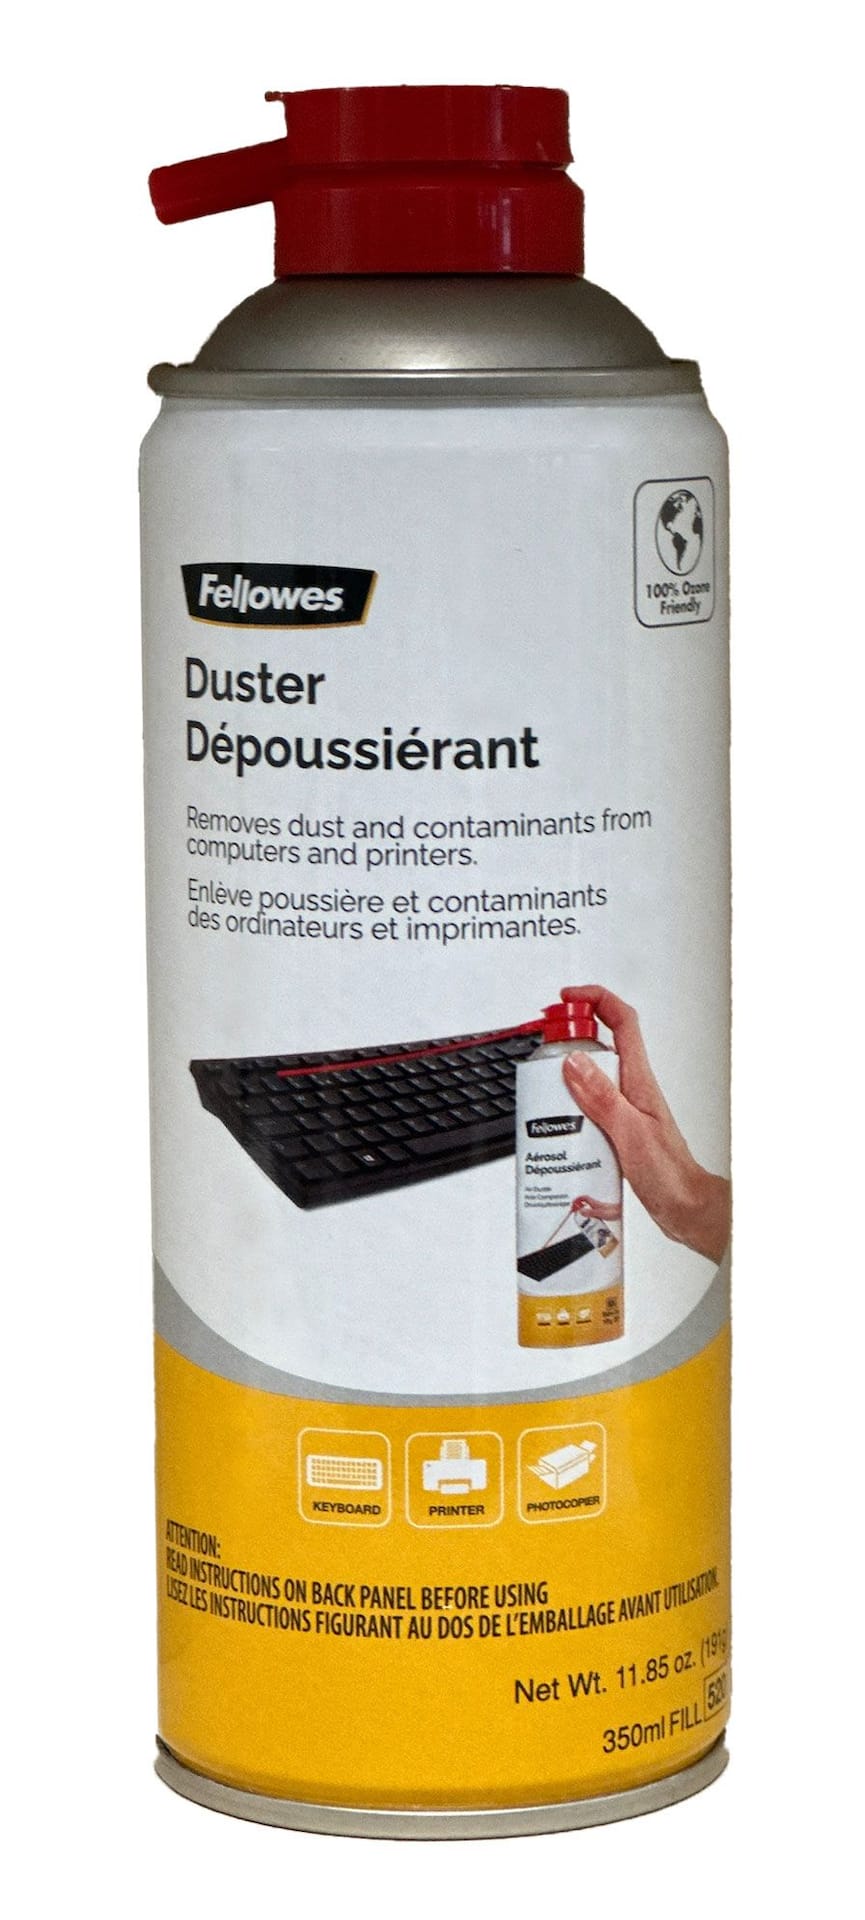 https://media-www.canadiantire.ca/product/automotive/electronics/home-electronics/0694556/air-duster-10oz-3f917a21-04c6-4765-a16b-e38d43c82d55-jpgrendition.jpg